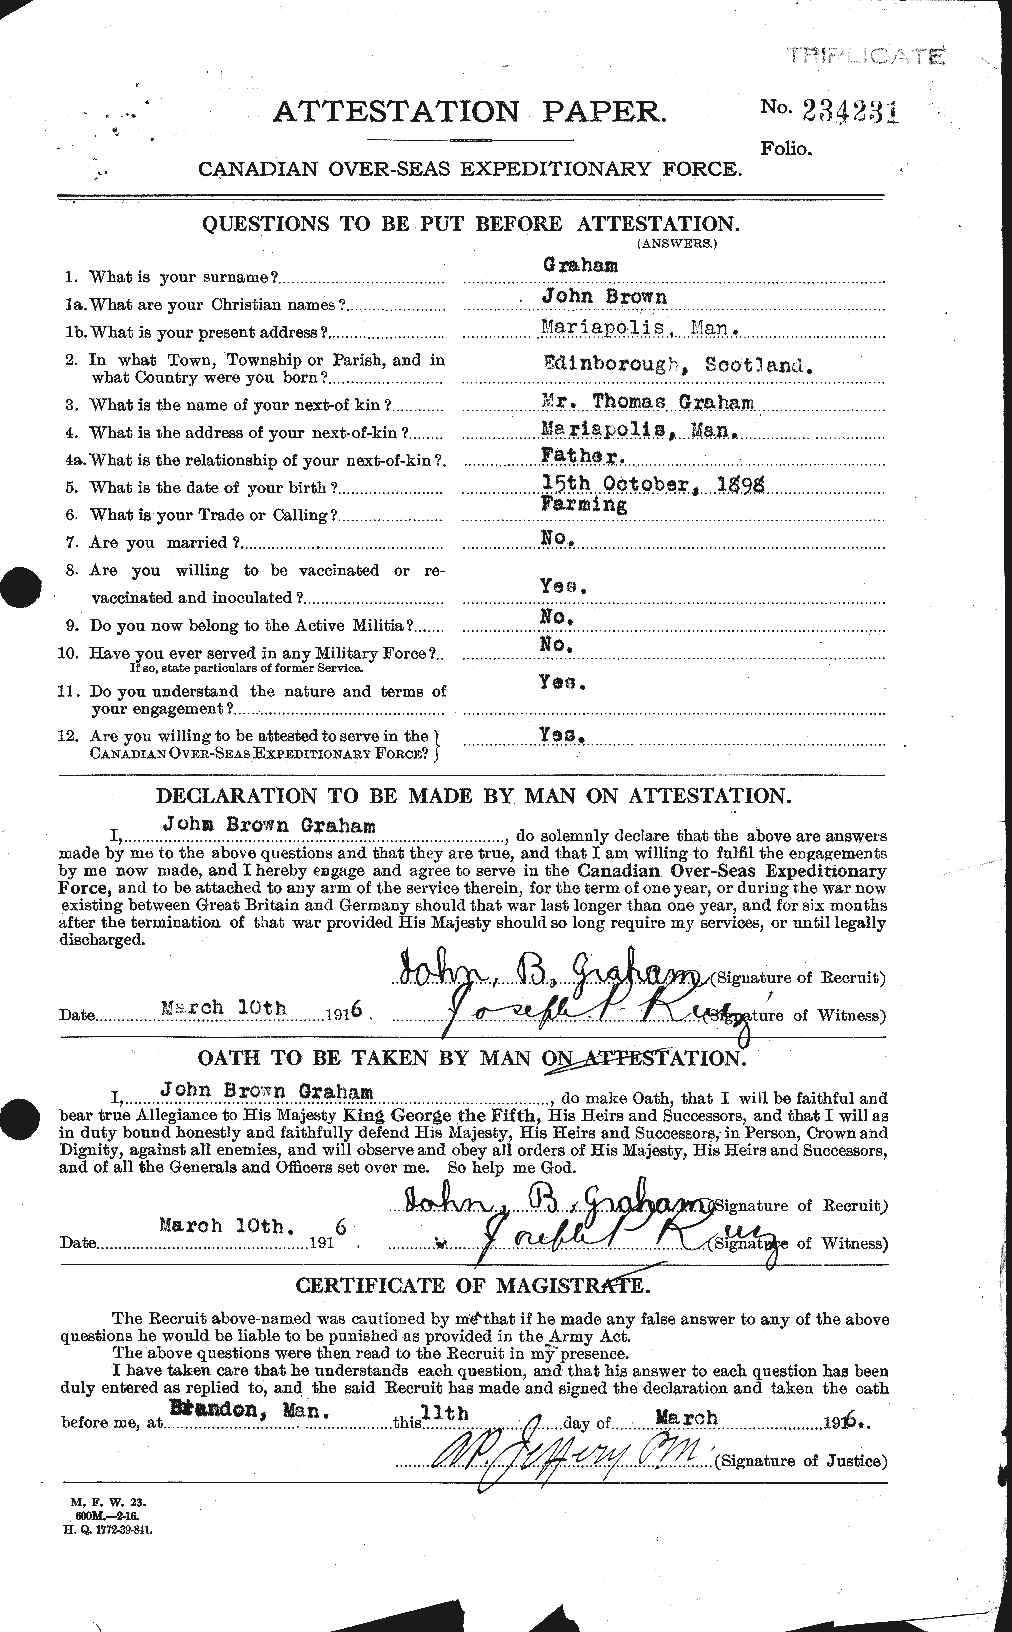 Personnel Records of the First World War - CEF 359157a